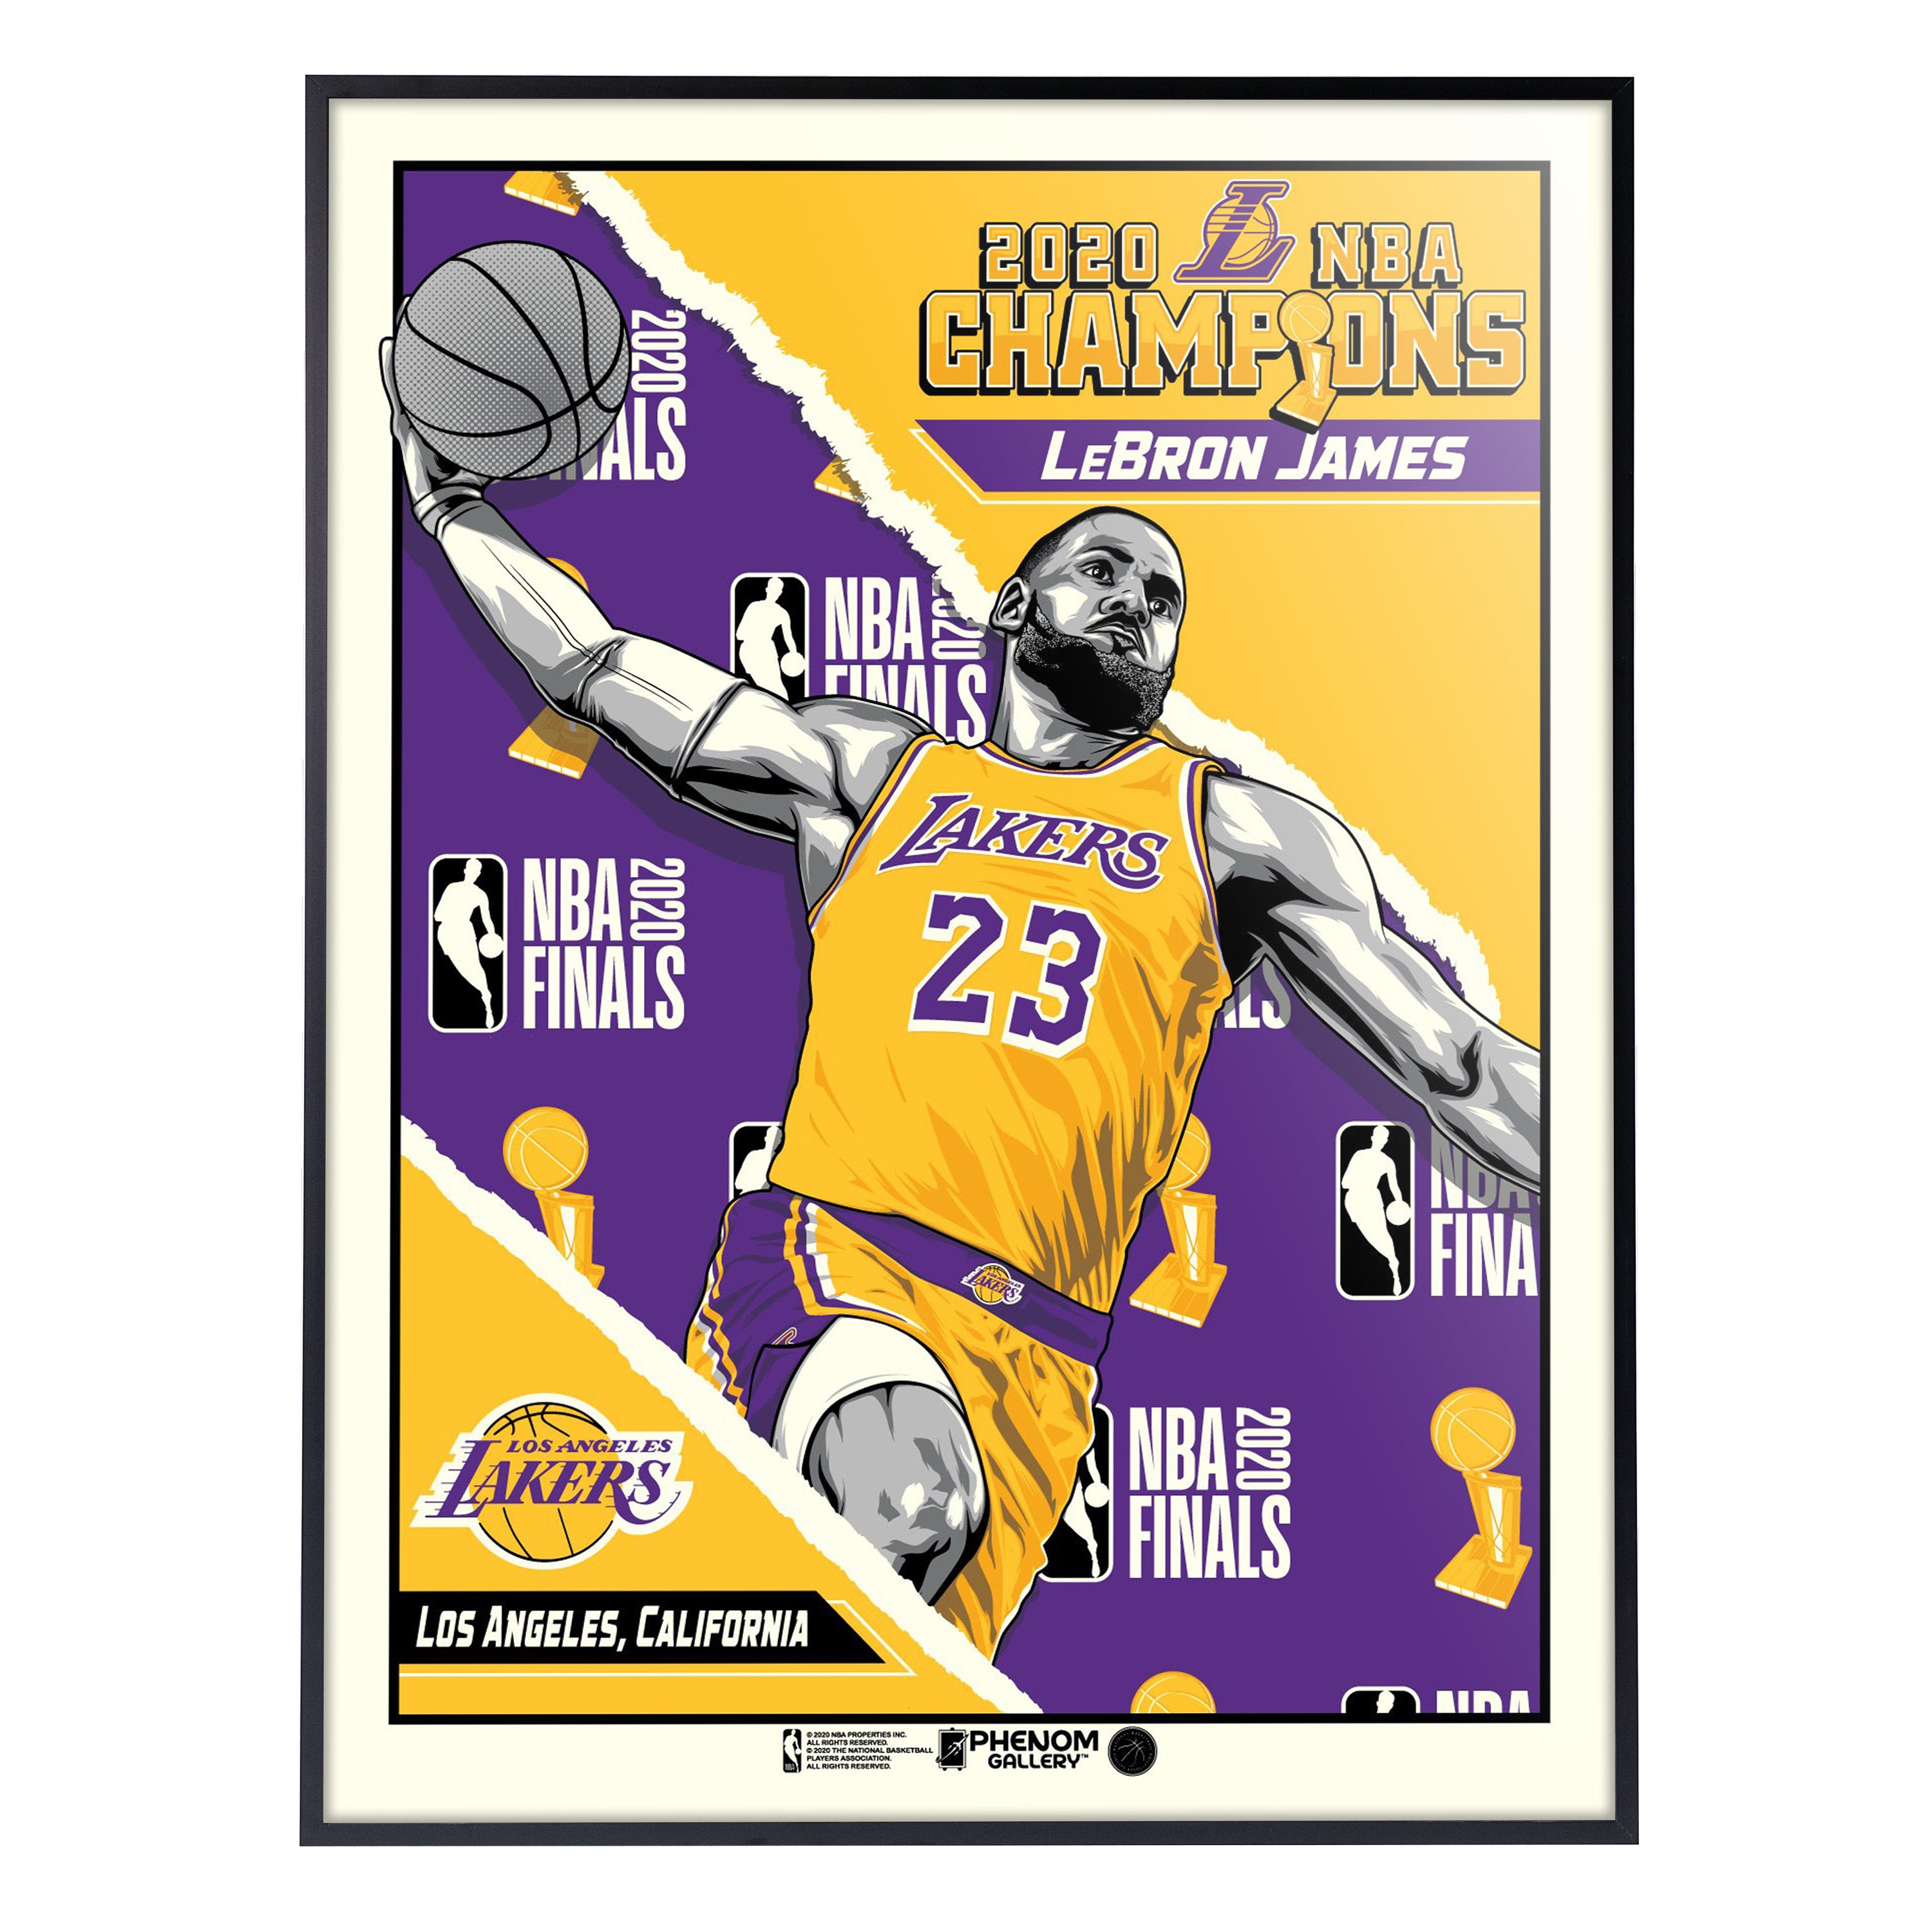 LeBron James Signed & Inscribed “2x NBA Champs” Authentic